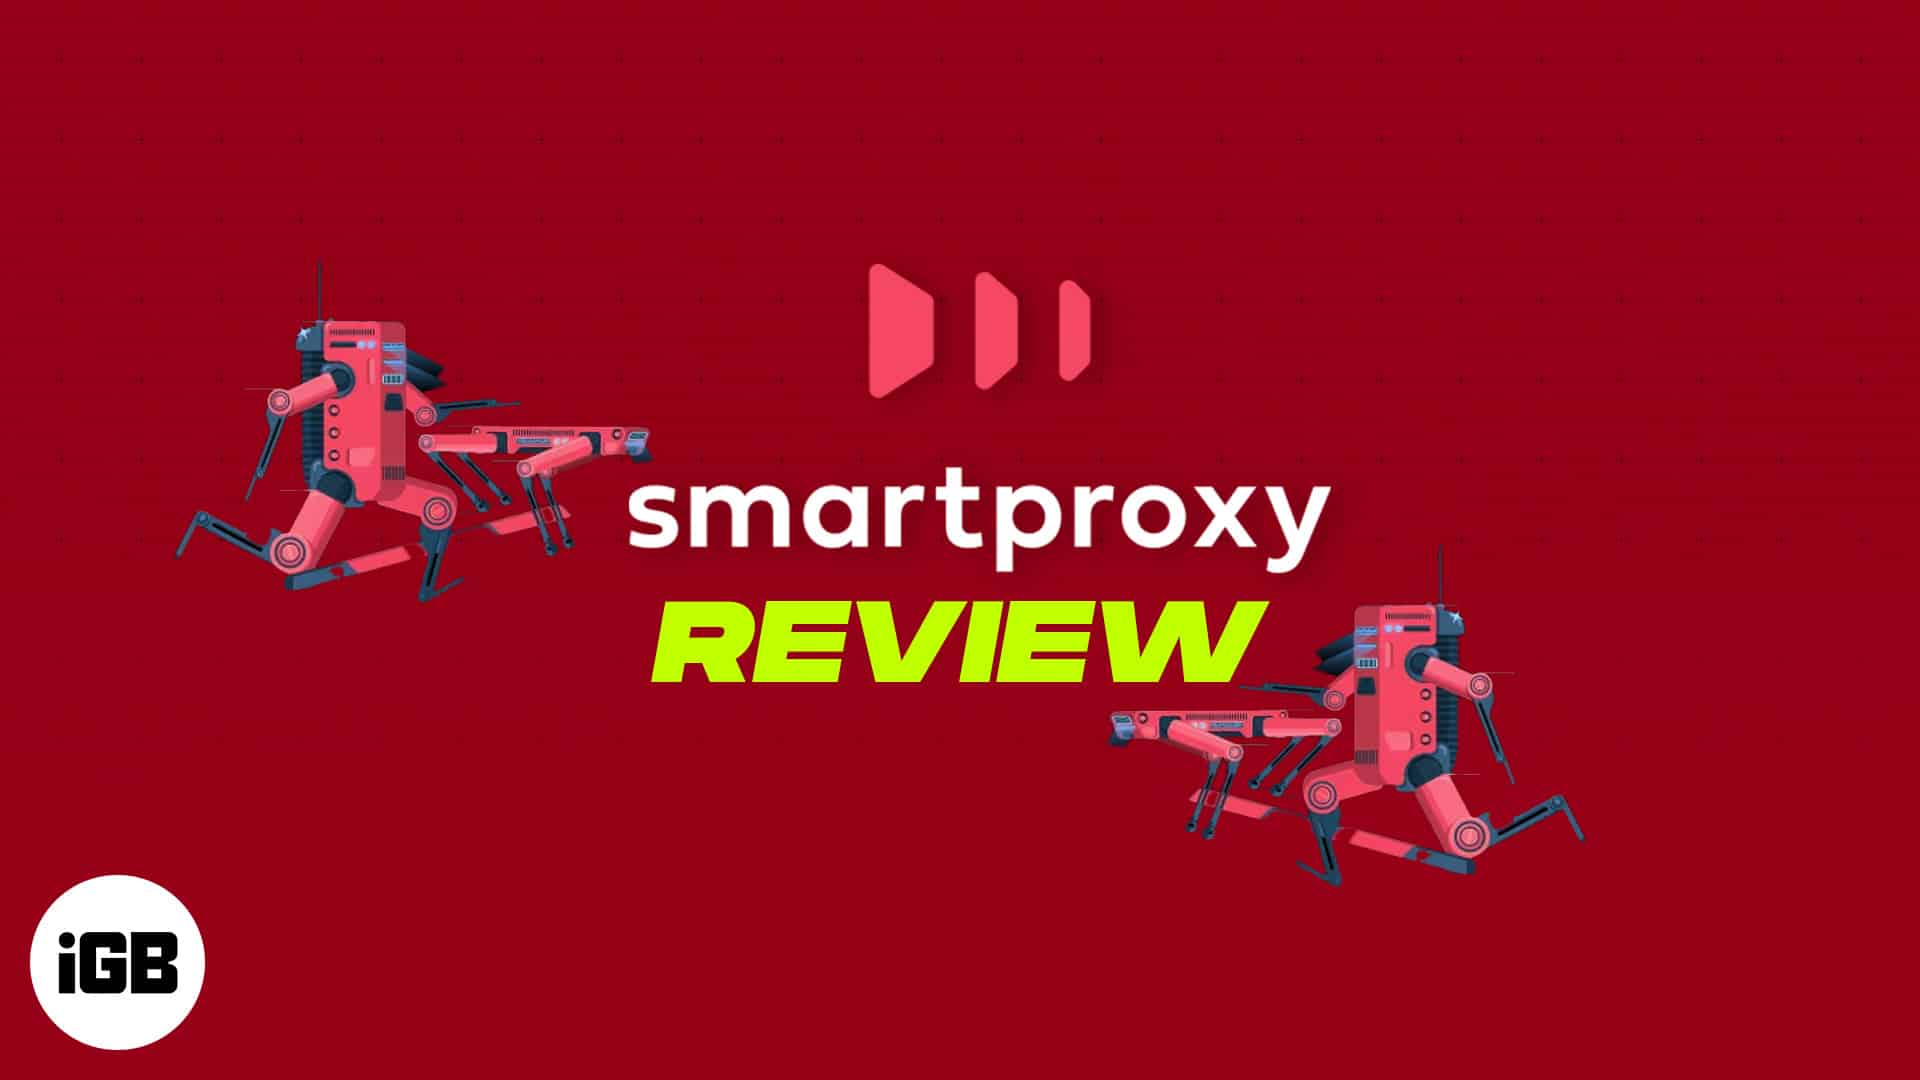 Smartproxy to create and manage proxy servers review